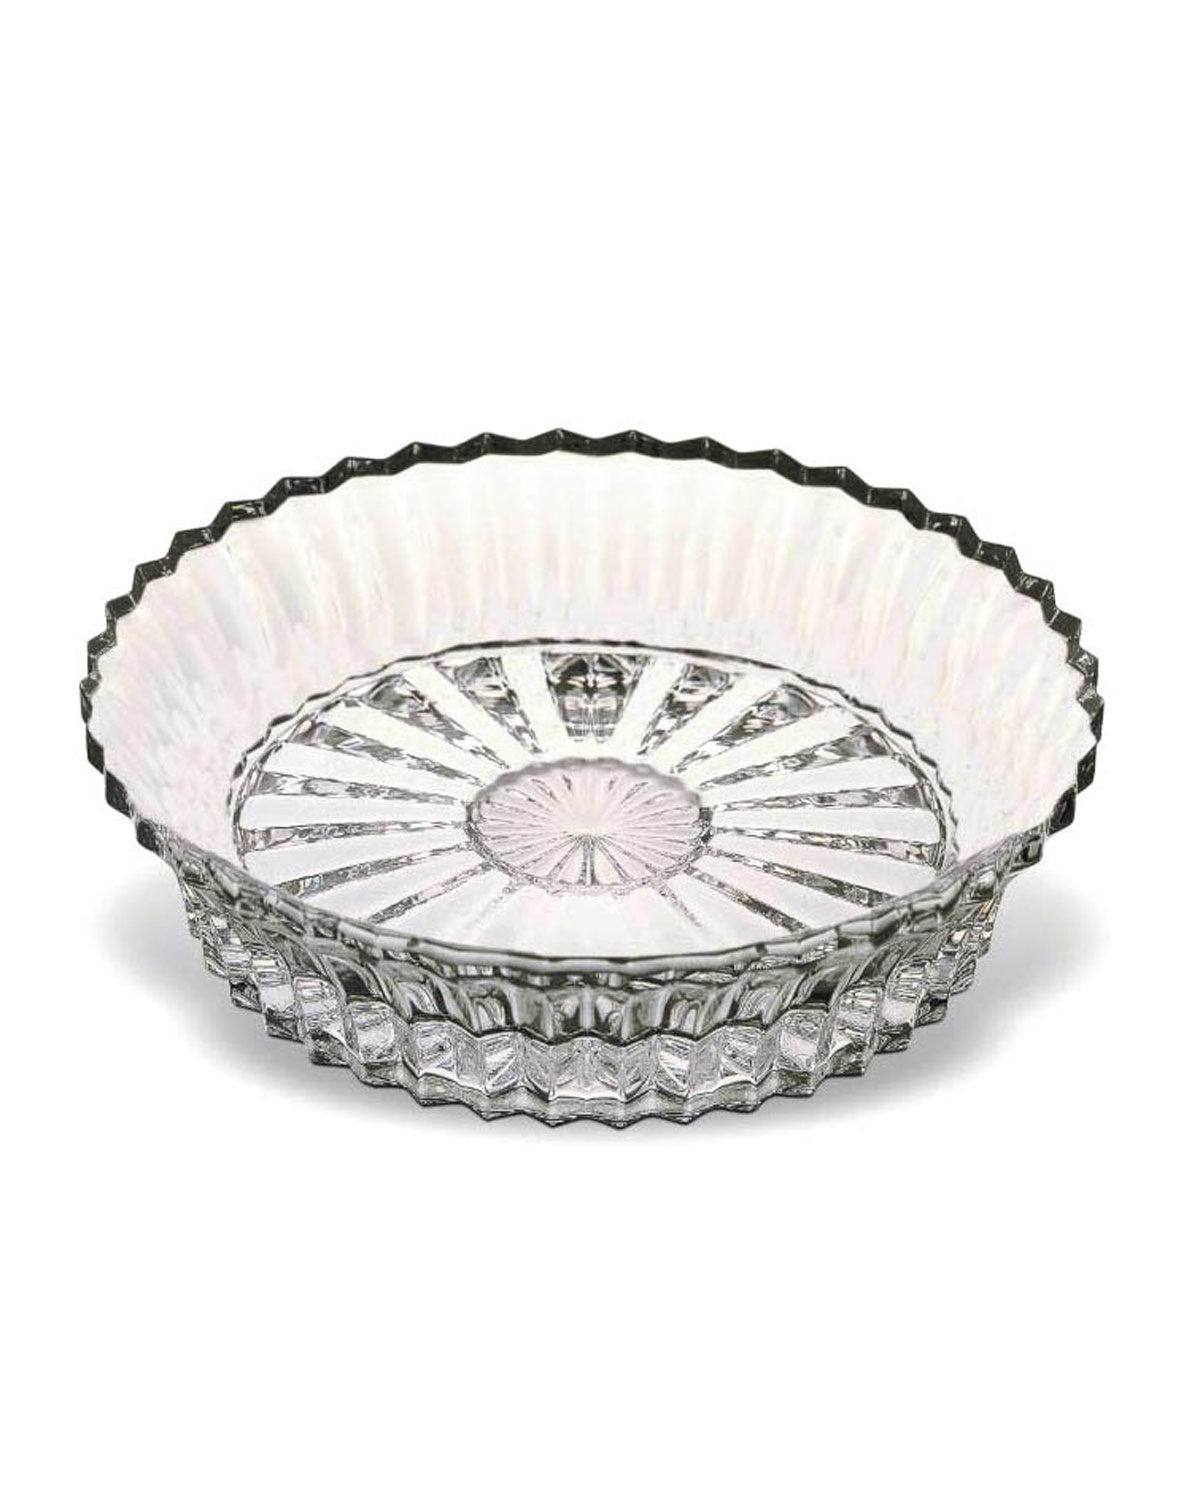 Baccarat Mille Nuits Crystal Wine Coaster